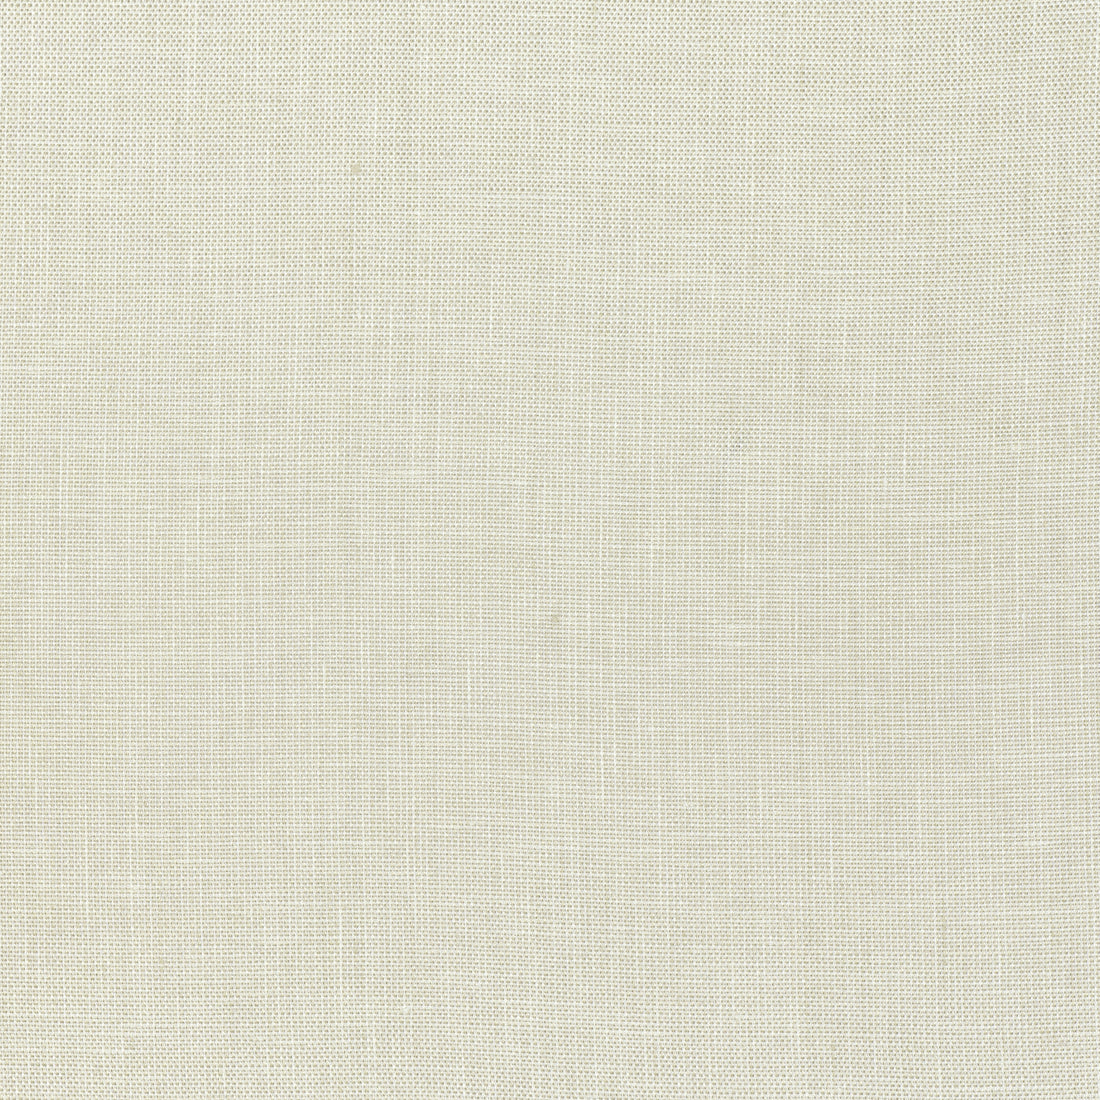 Skye Linen fabric in flax color - pattern number FWW7620 - by Thibaut in the Palisades collection